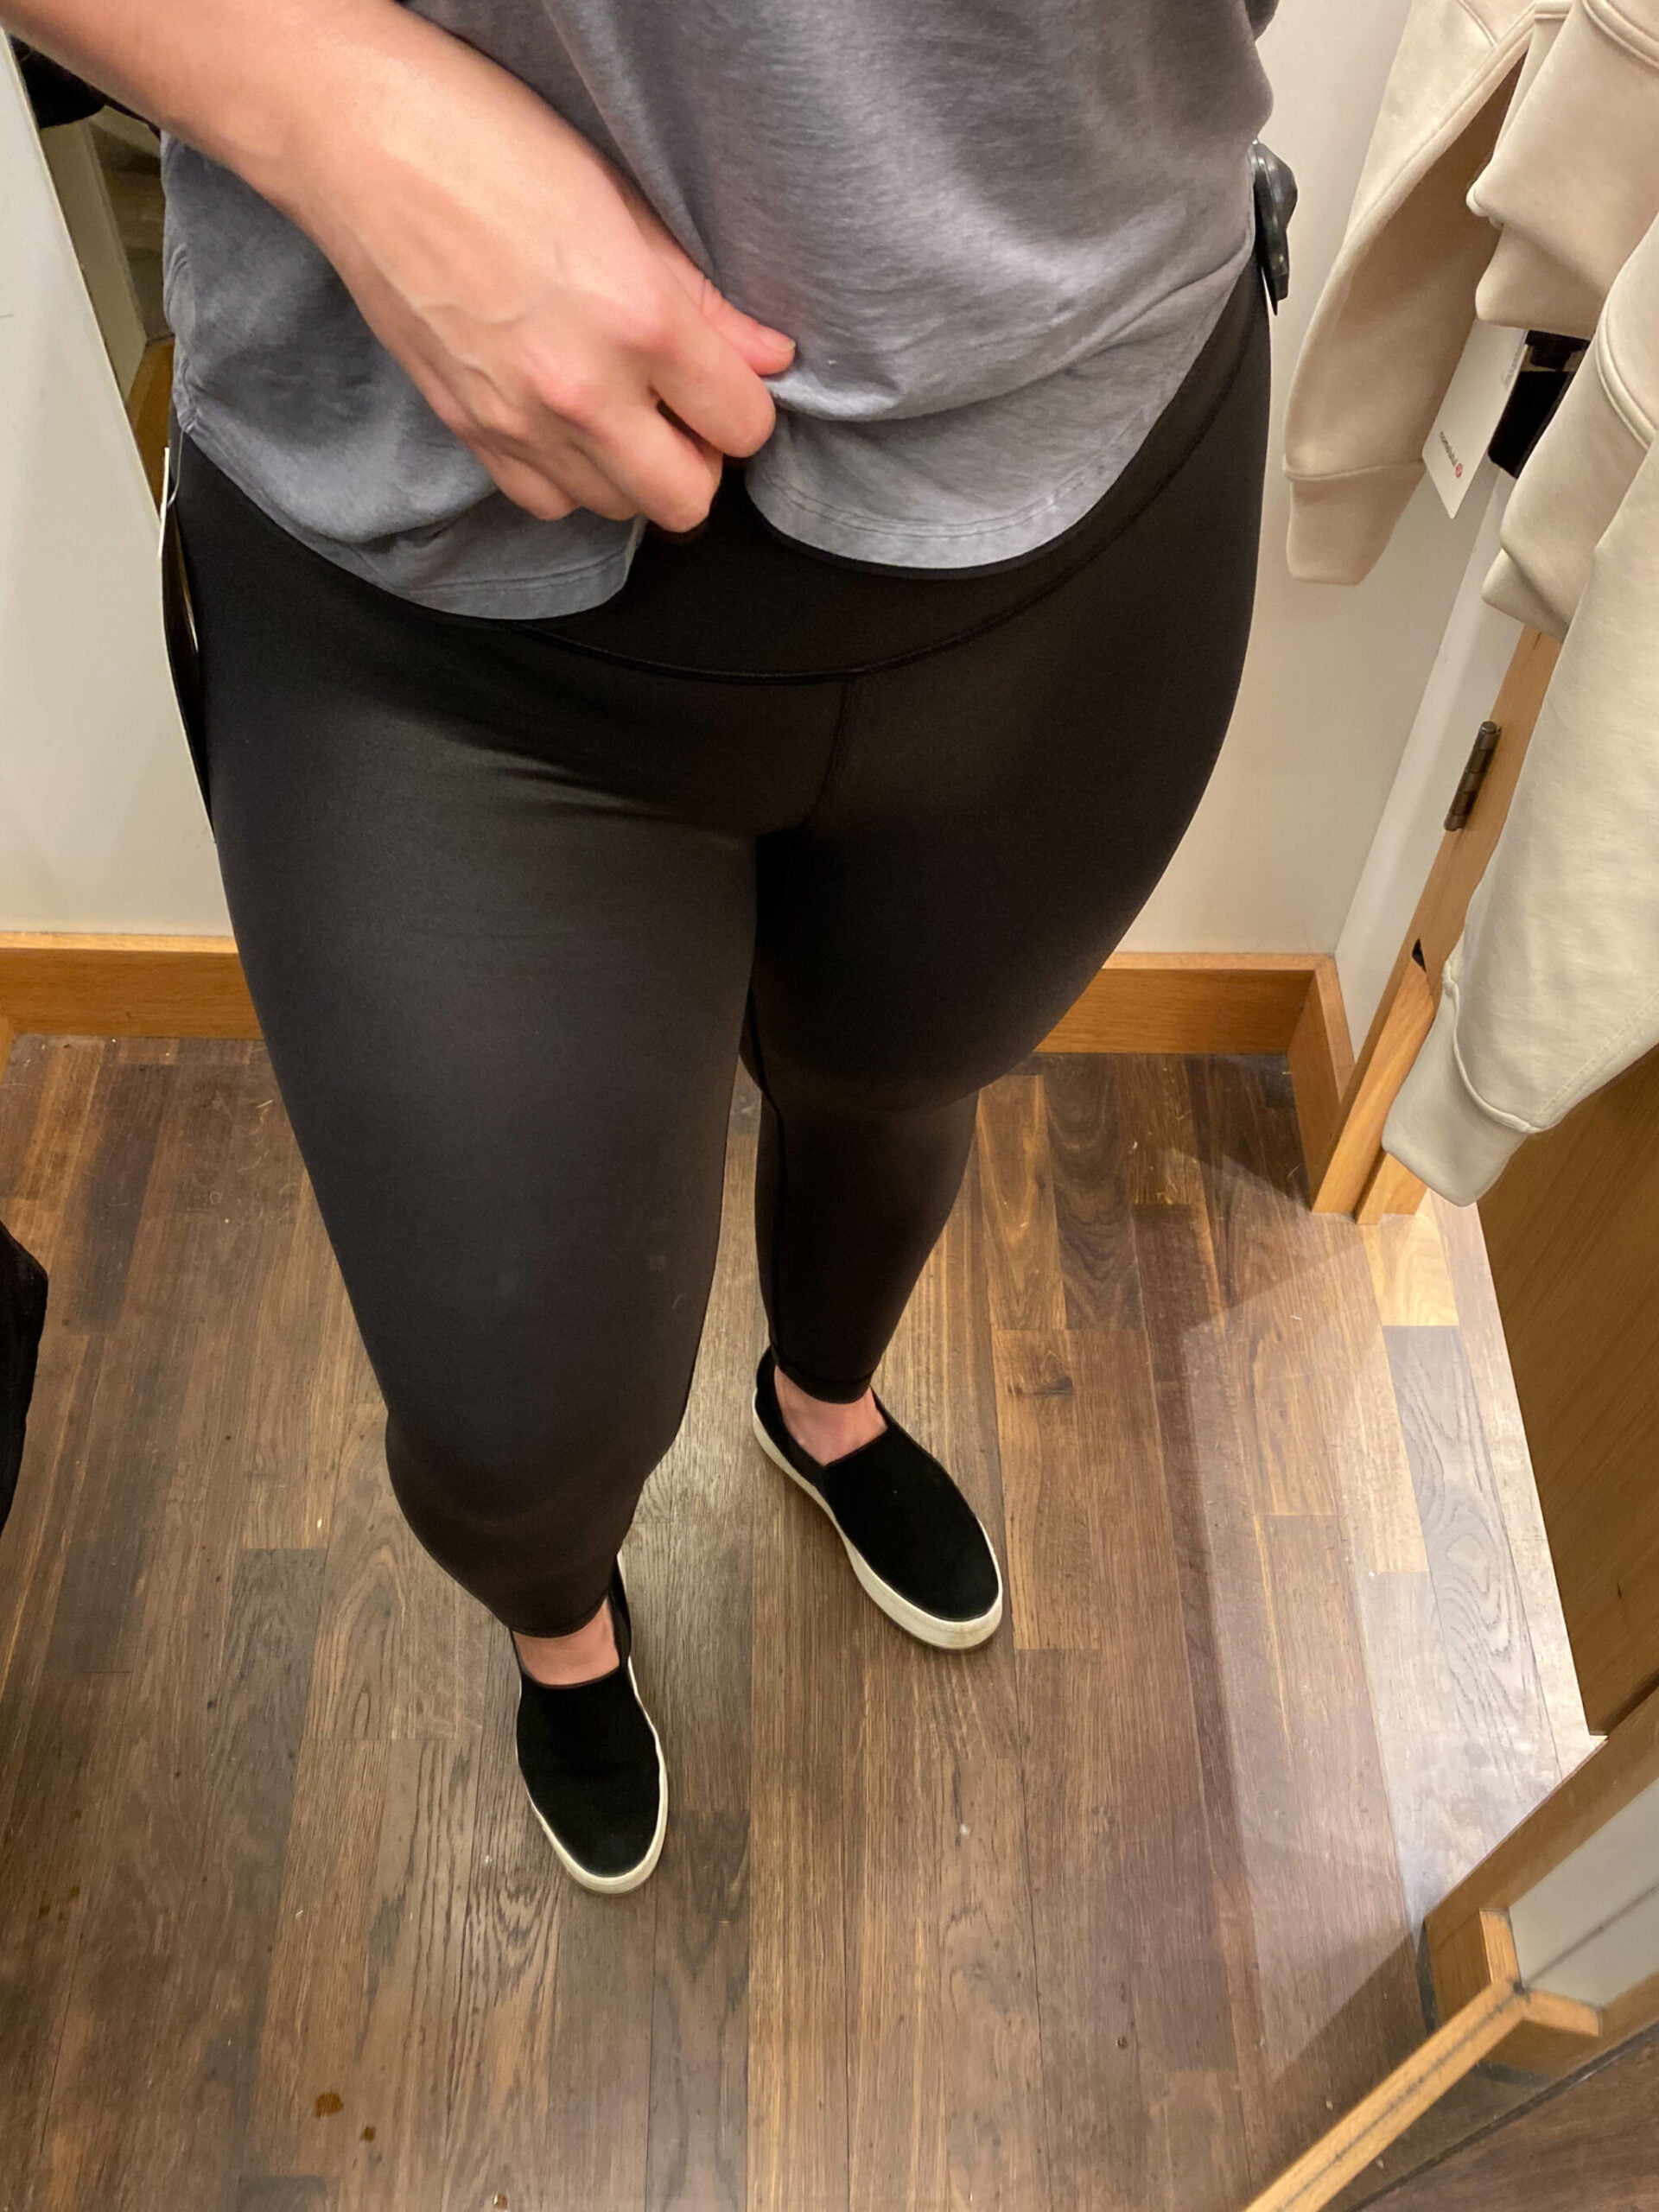 Yogo Embossed Align try on - thoughts? : r/lululemon